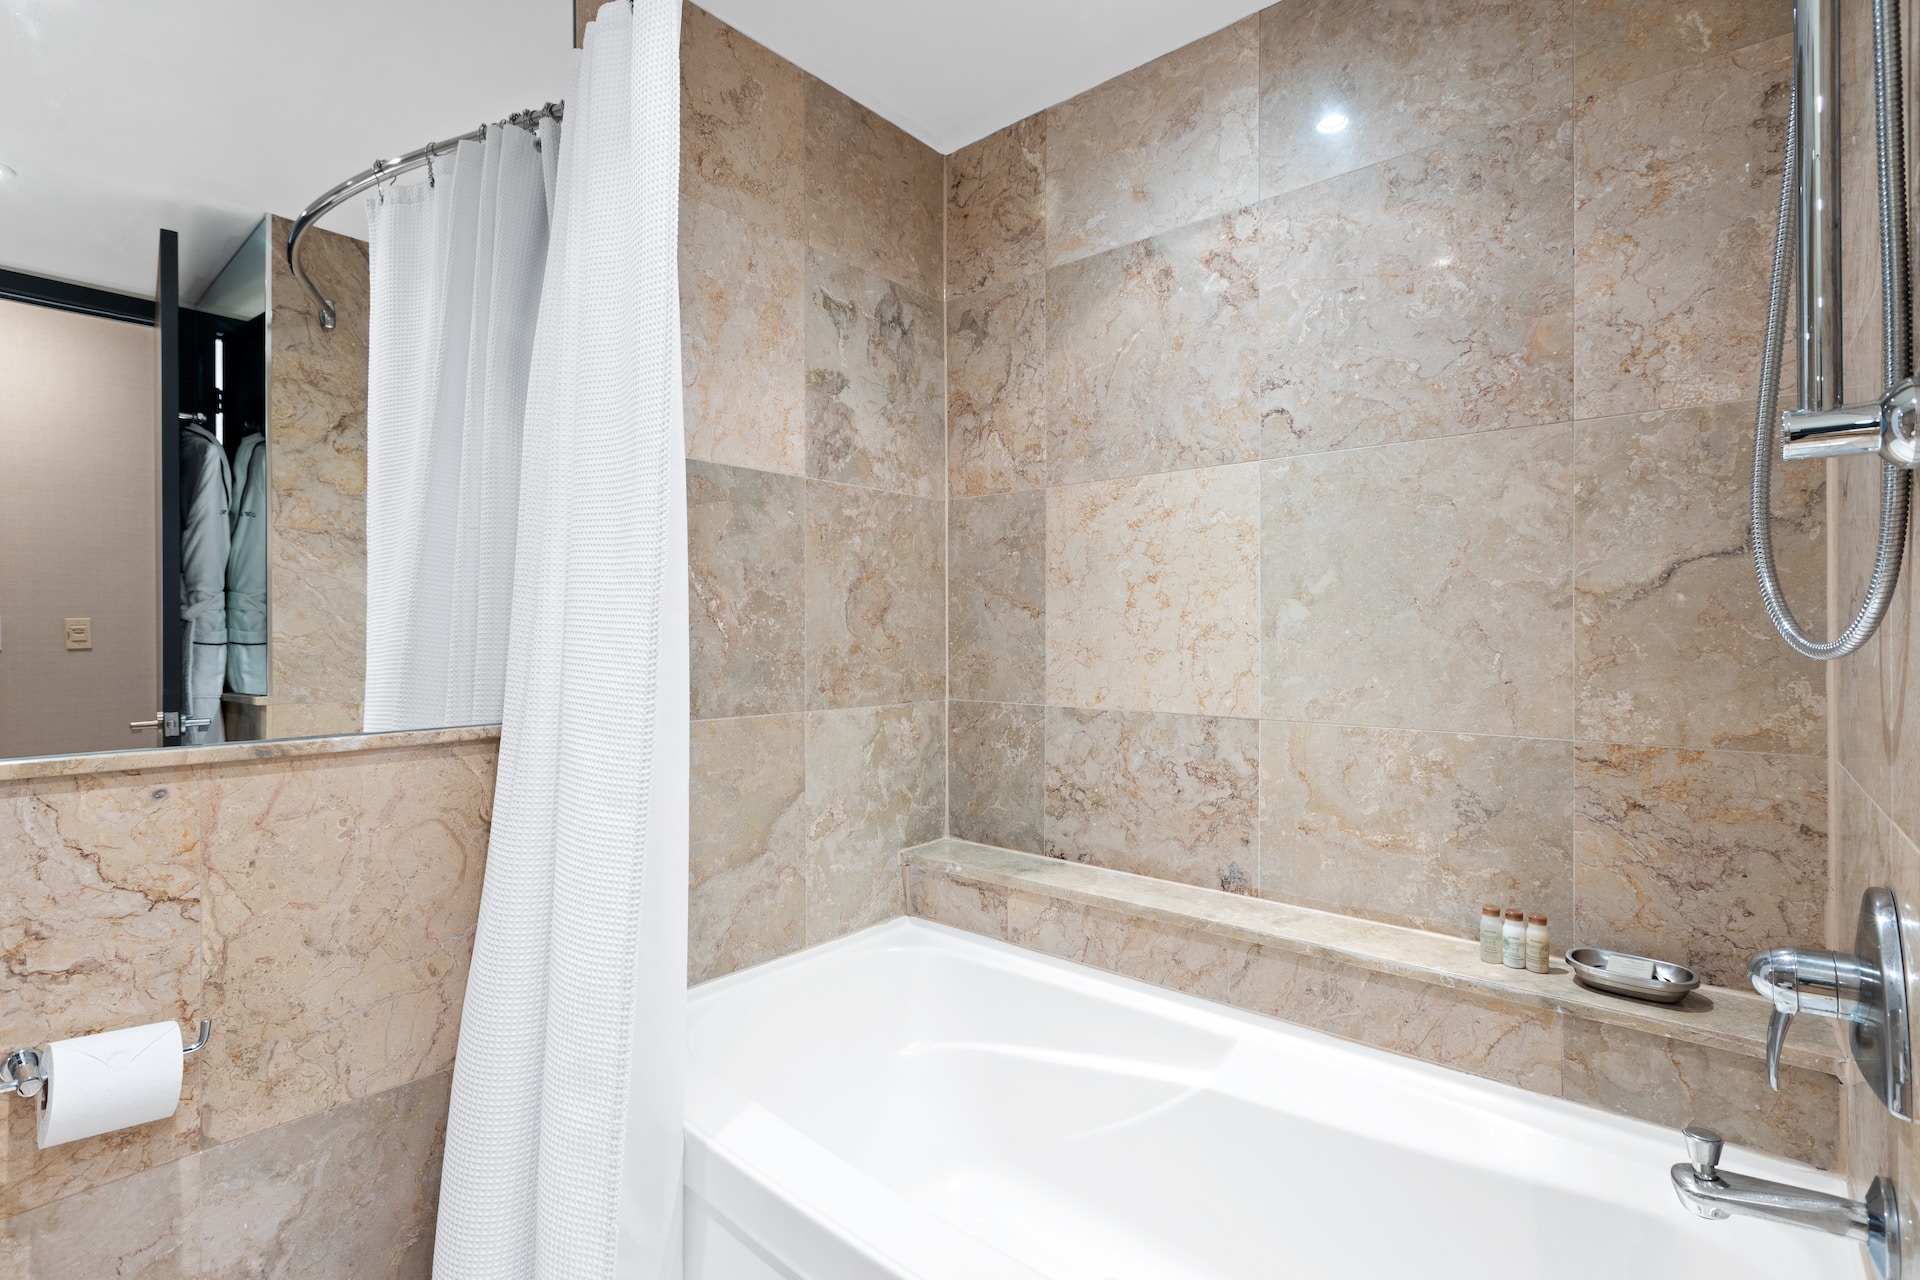 3 Essential Factors to Think About When You Want to Carry Out a Bathroom Renovation